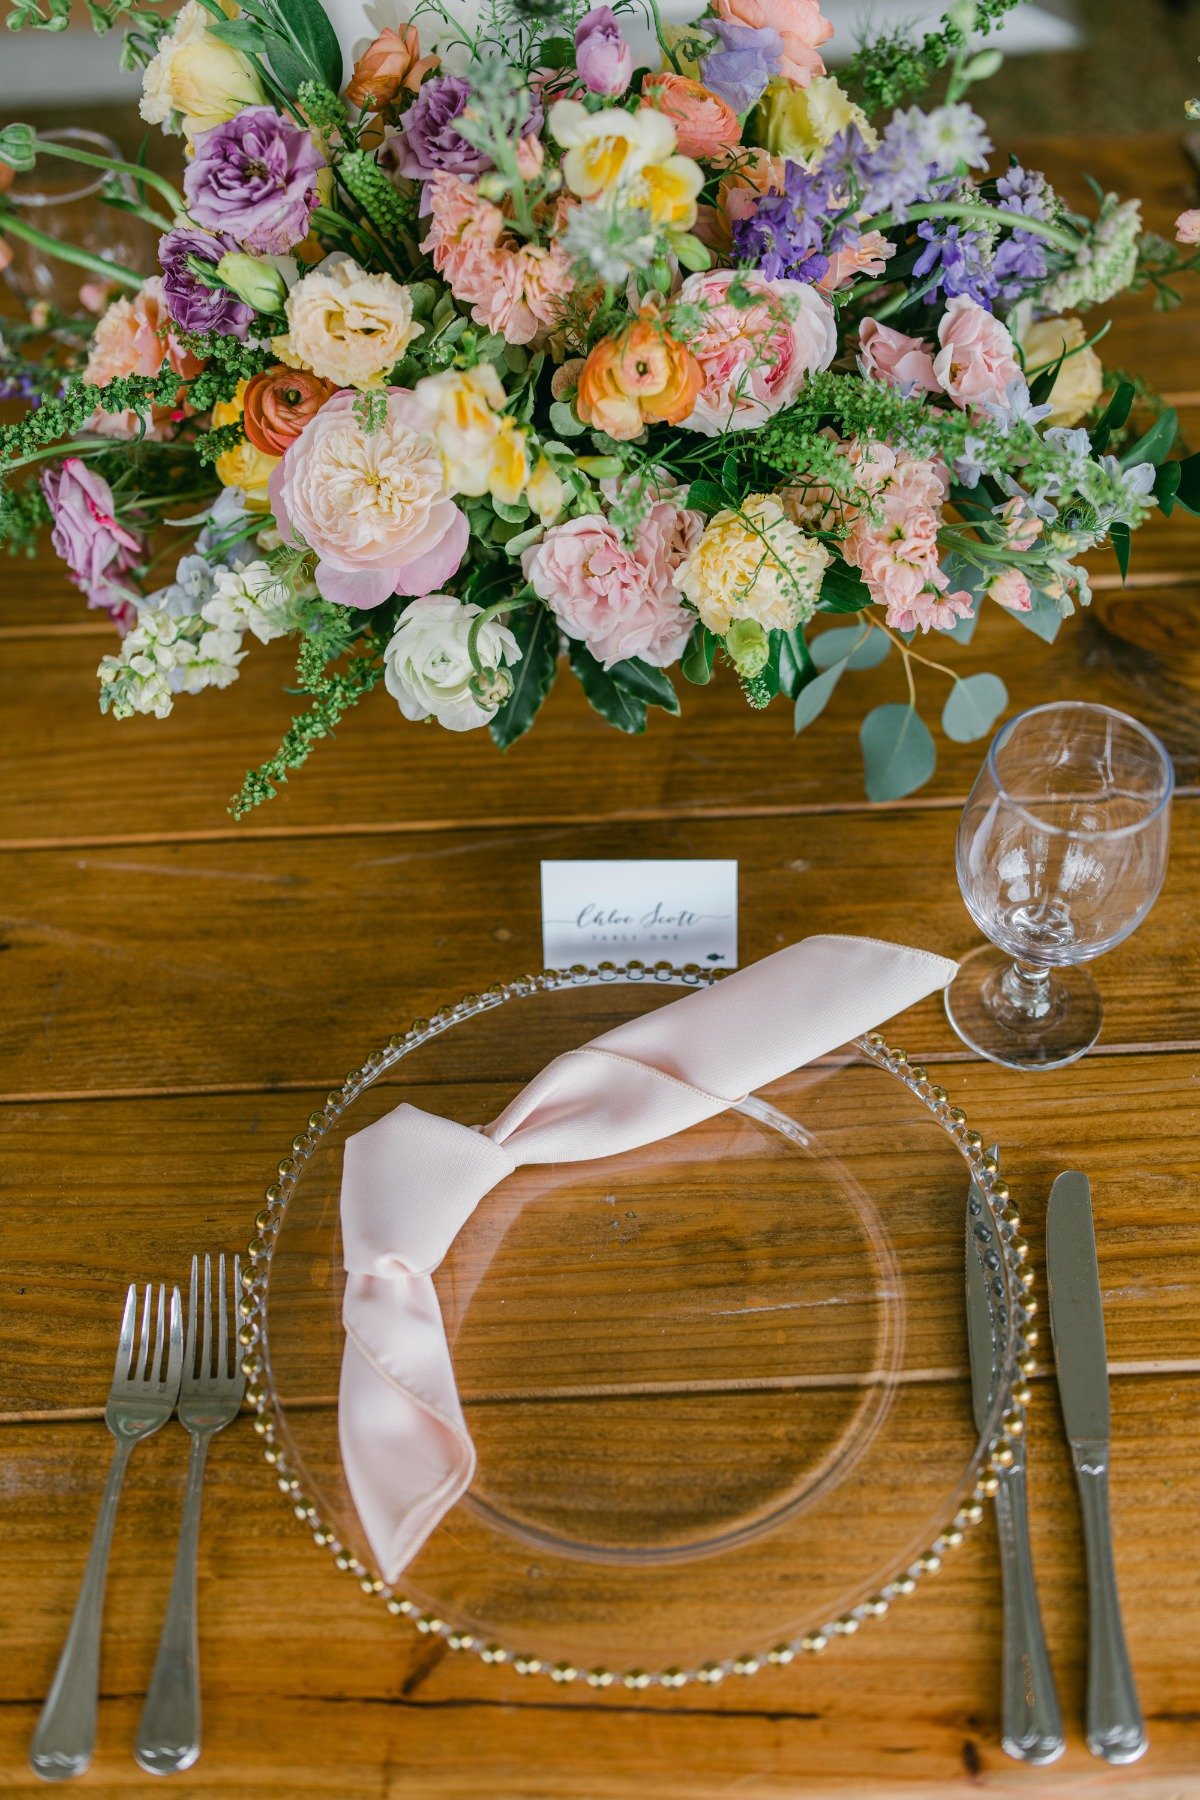 Place setting with pink napkin and centerpiece arrangement